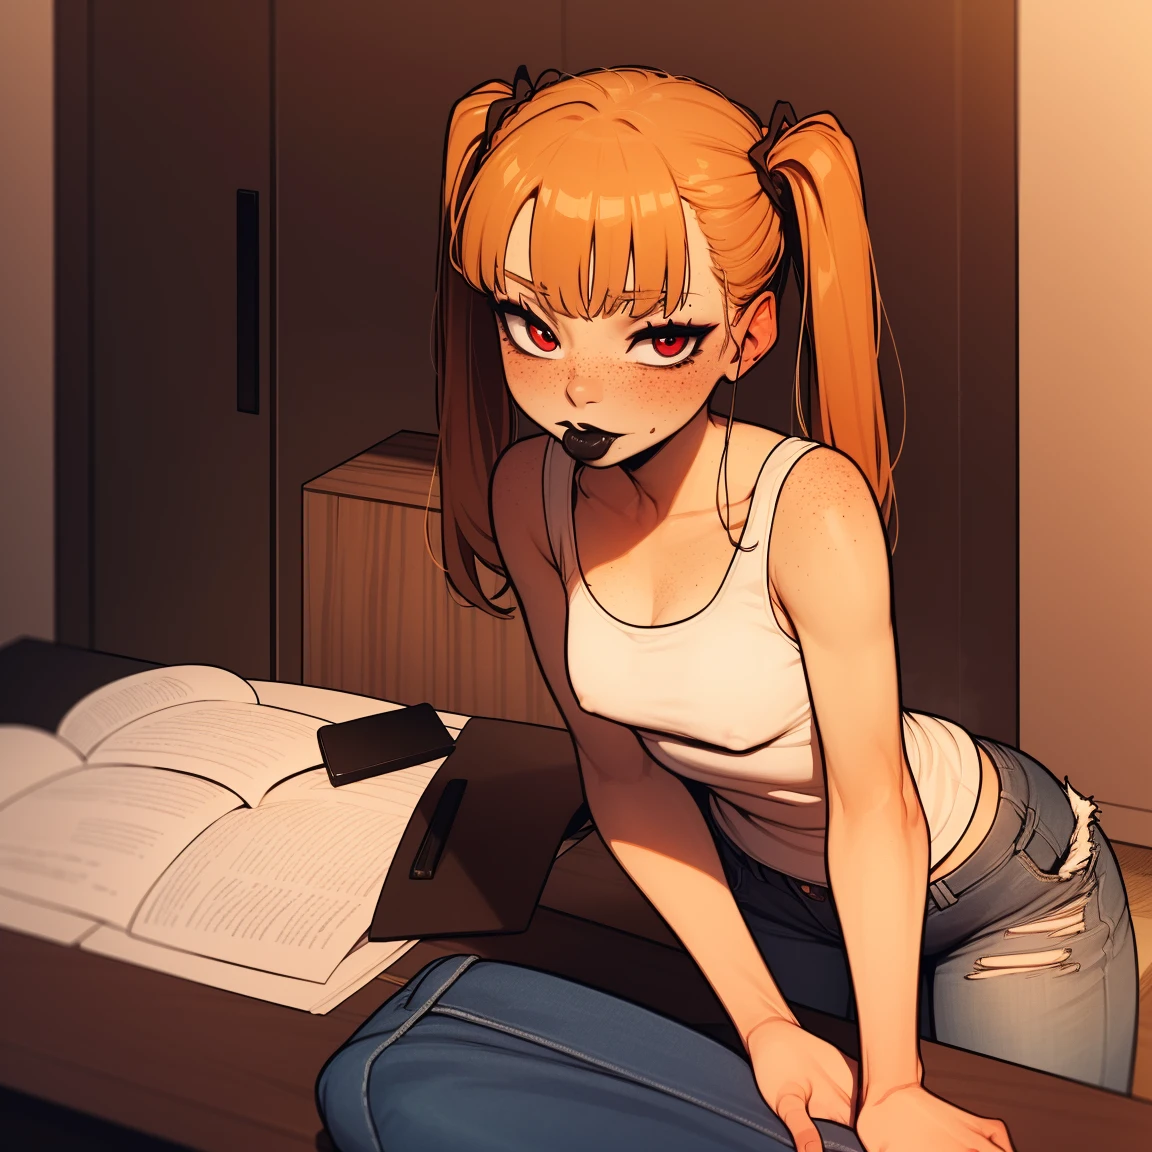  Ginger woman, braided twin tails, freckles, black tank top, jeans, tattoos, interior background, black lipstick, thin, , red eye shadow, braided twintails, ginger hair, ginger hair, skinny, bangs, leaning over desk, looking at viewer,  black lipstick, black lipstick